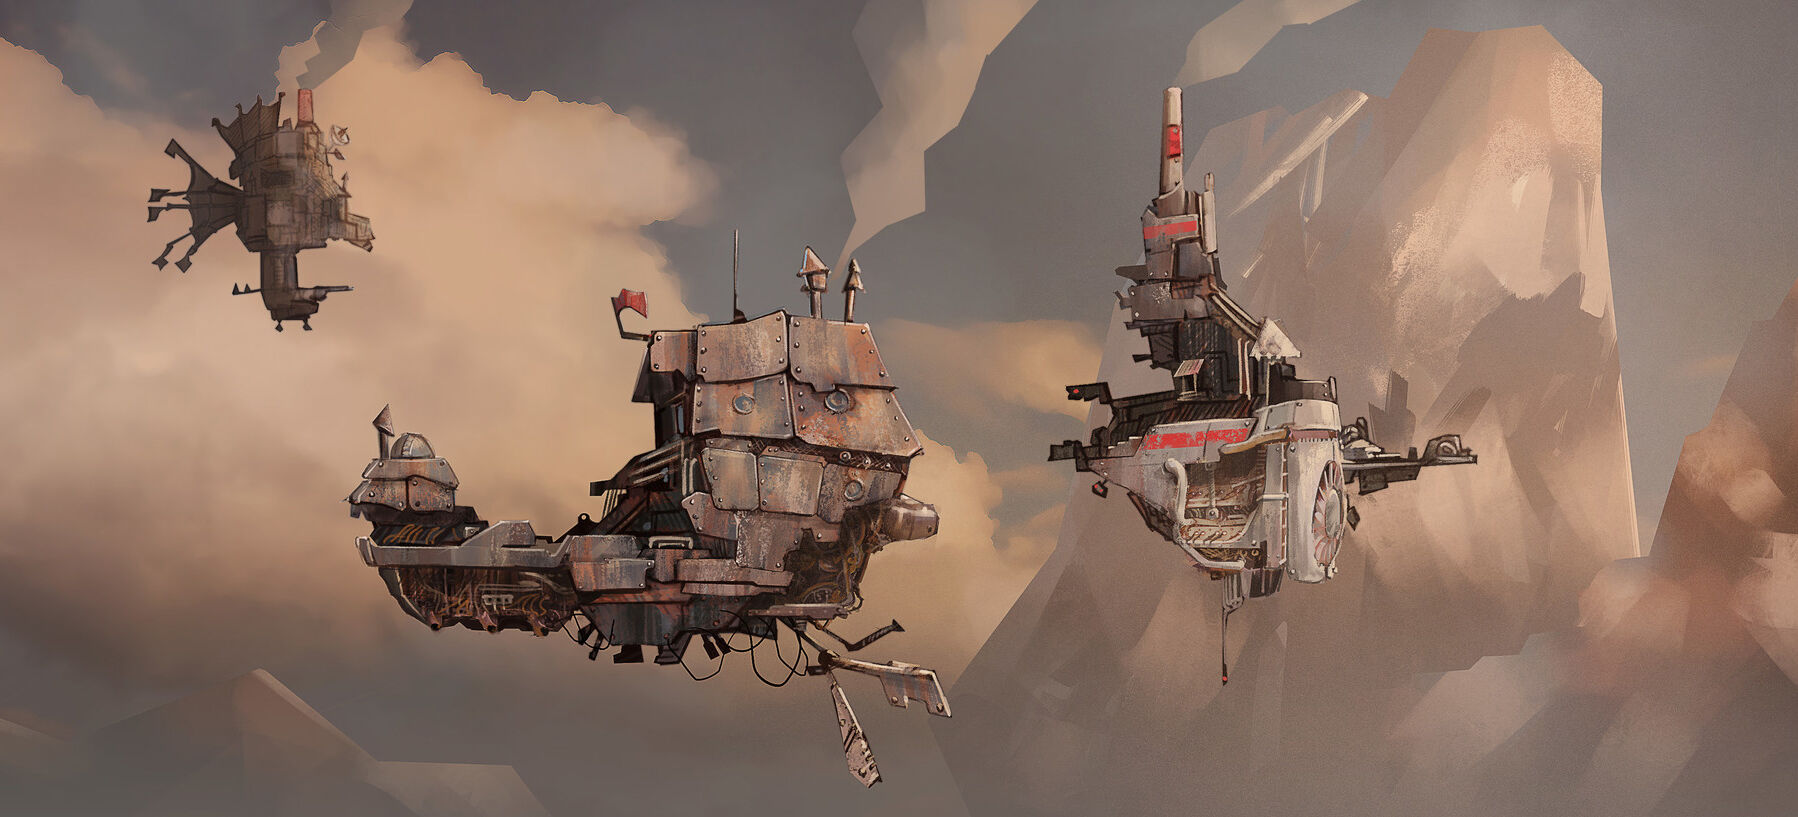 Digital artist Ian McQue's work featuring image of floating aircrafts